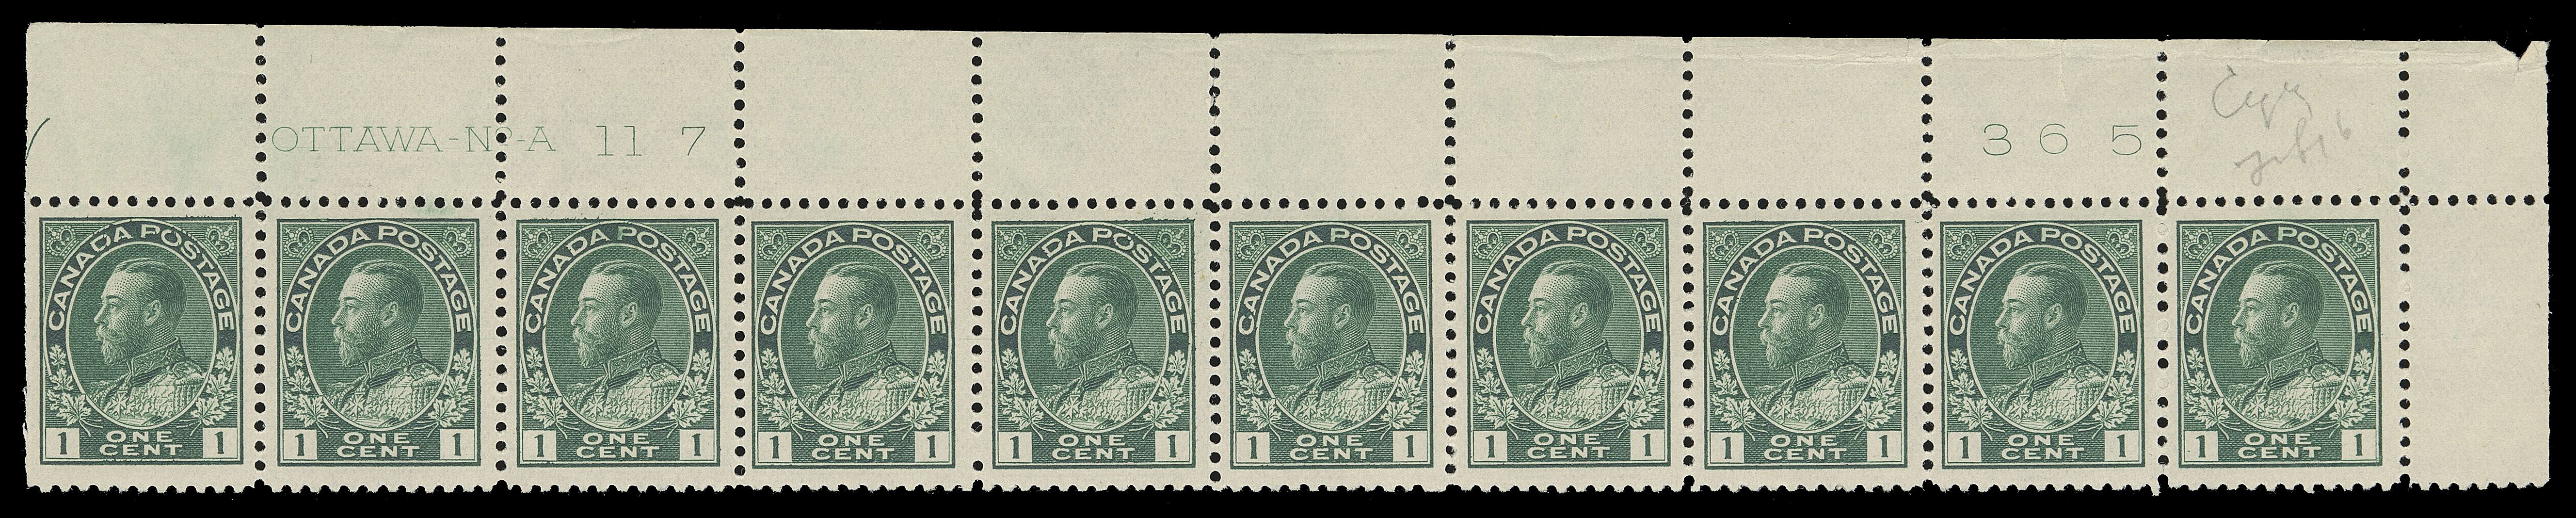 ADMIRAL STAMPS  104,Three strips of ten with consecutive plate numbers - UR Plate 117, UL Plate 118 and UR Plate 119, two are quite well centered, latter with printing order "365" punched out, a few split perfs strengthened by paper hinge, all stamps are NH, pencilled "Feb 16" or "Mch 